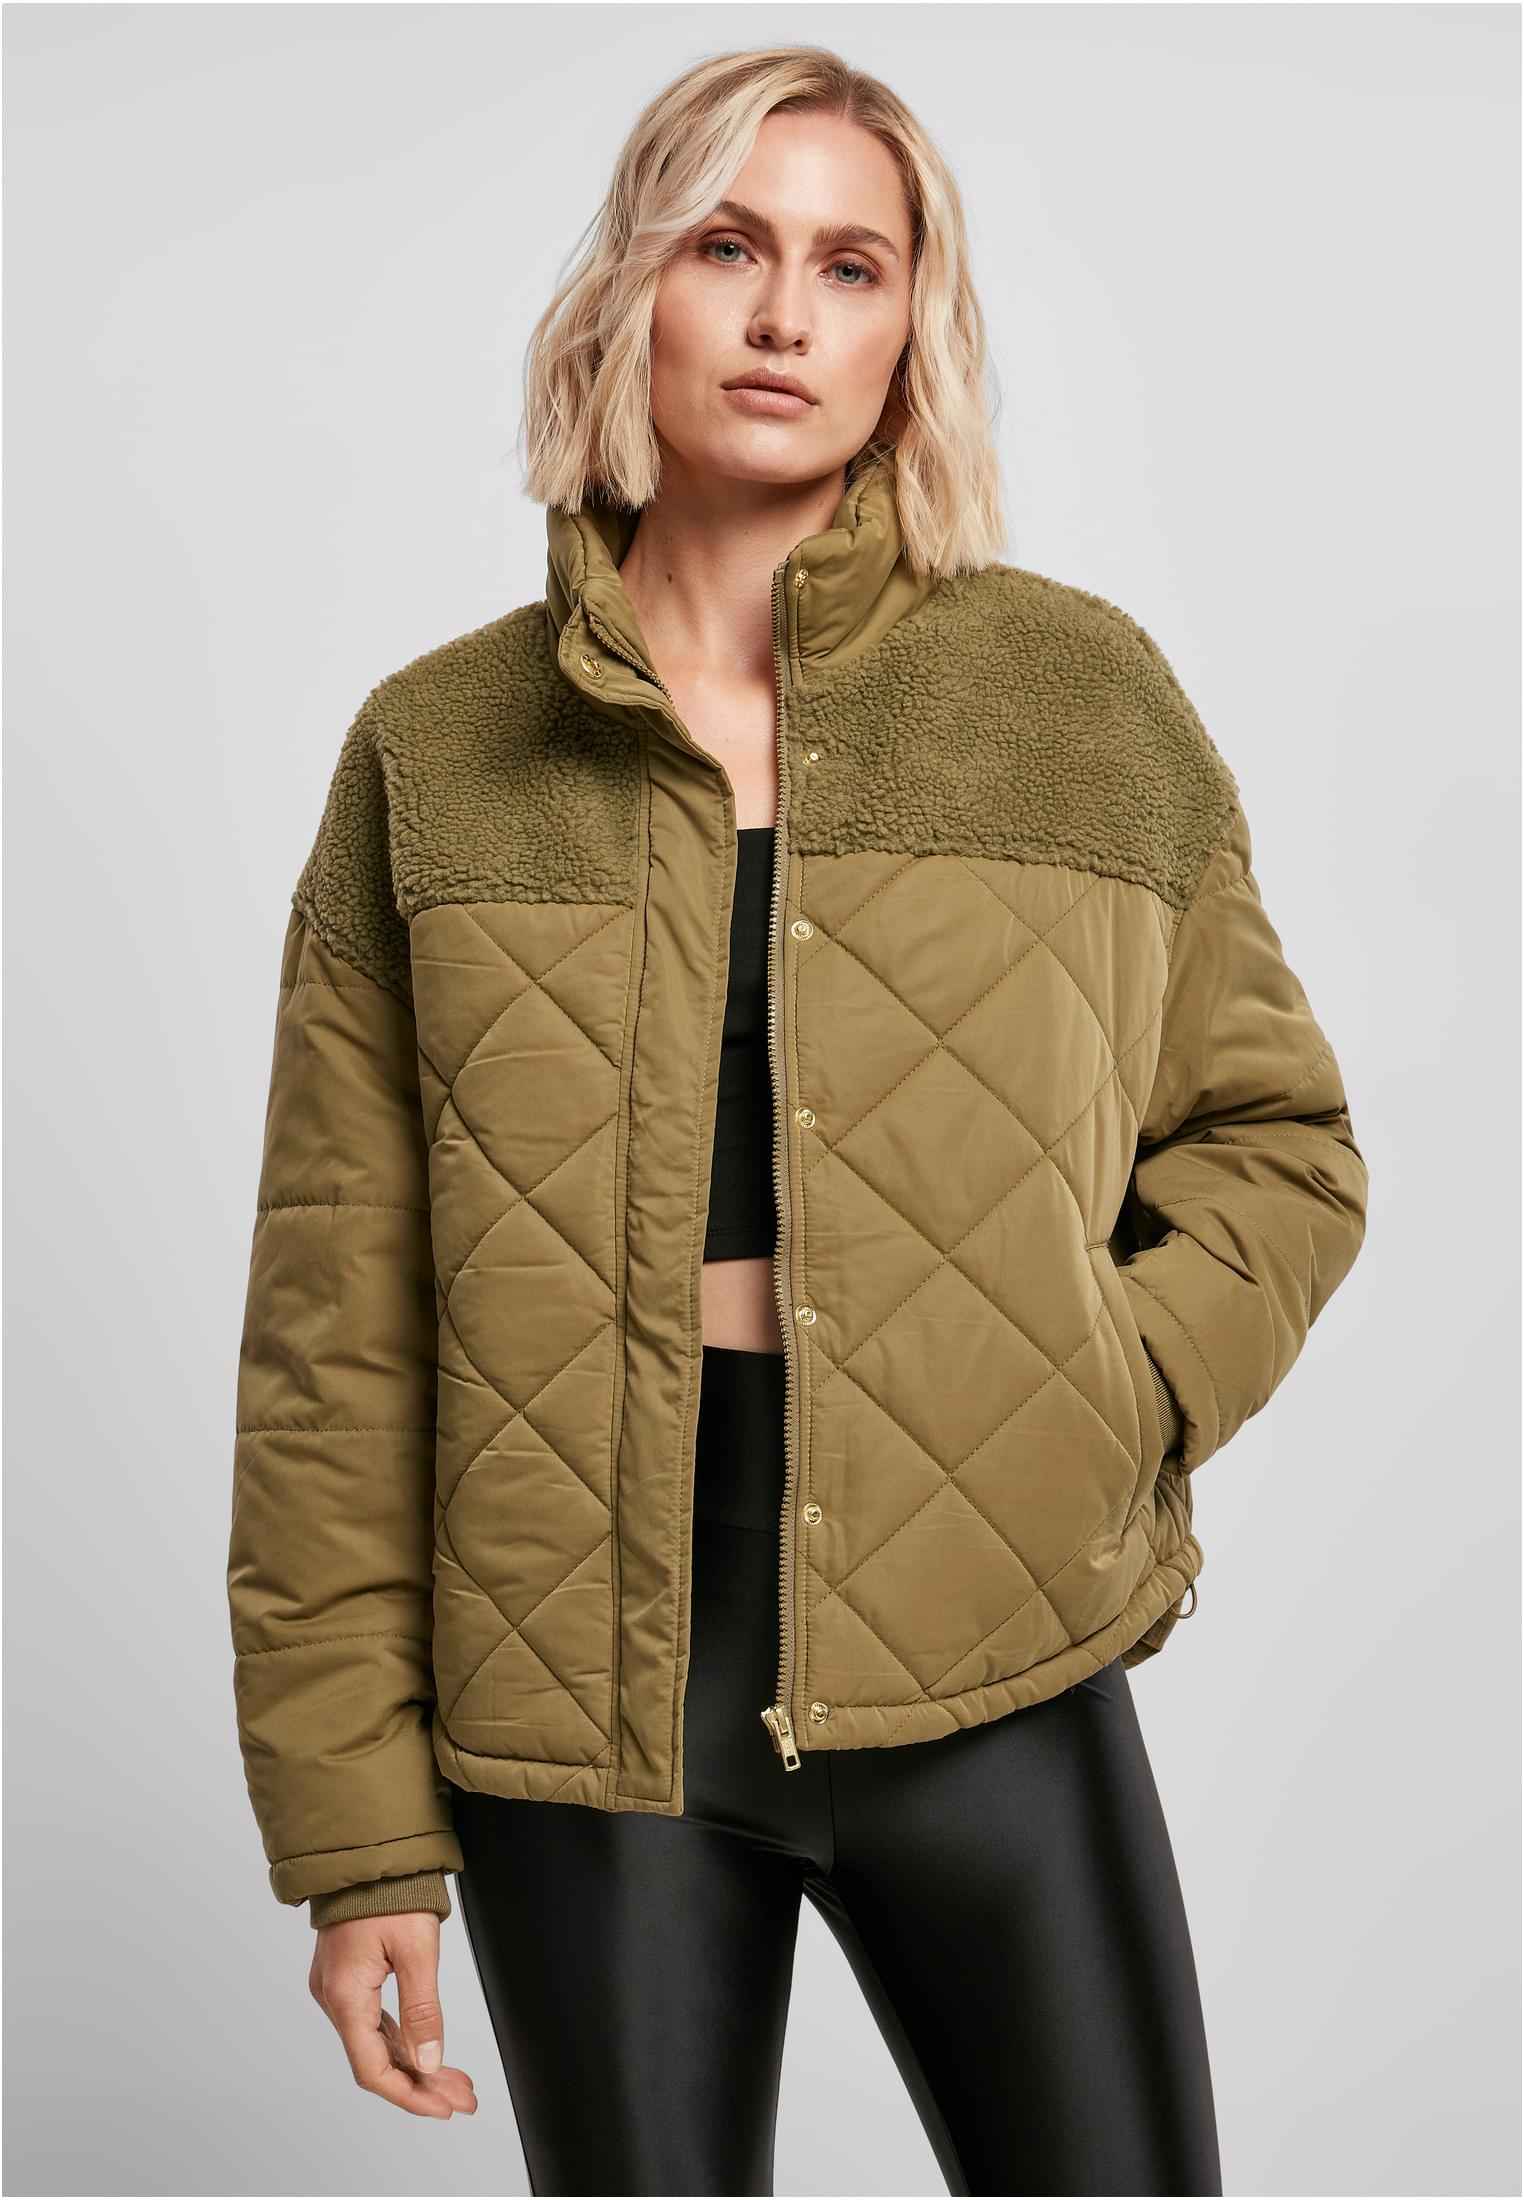 SissyBoy Ladies Quilted Puffer Jacket Oatmeal for Sale ✔️ Lowest Price  Guaranteed